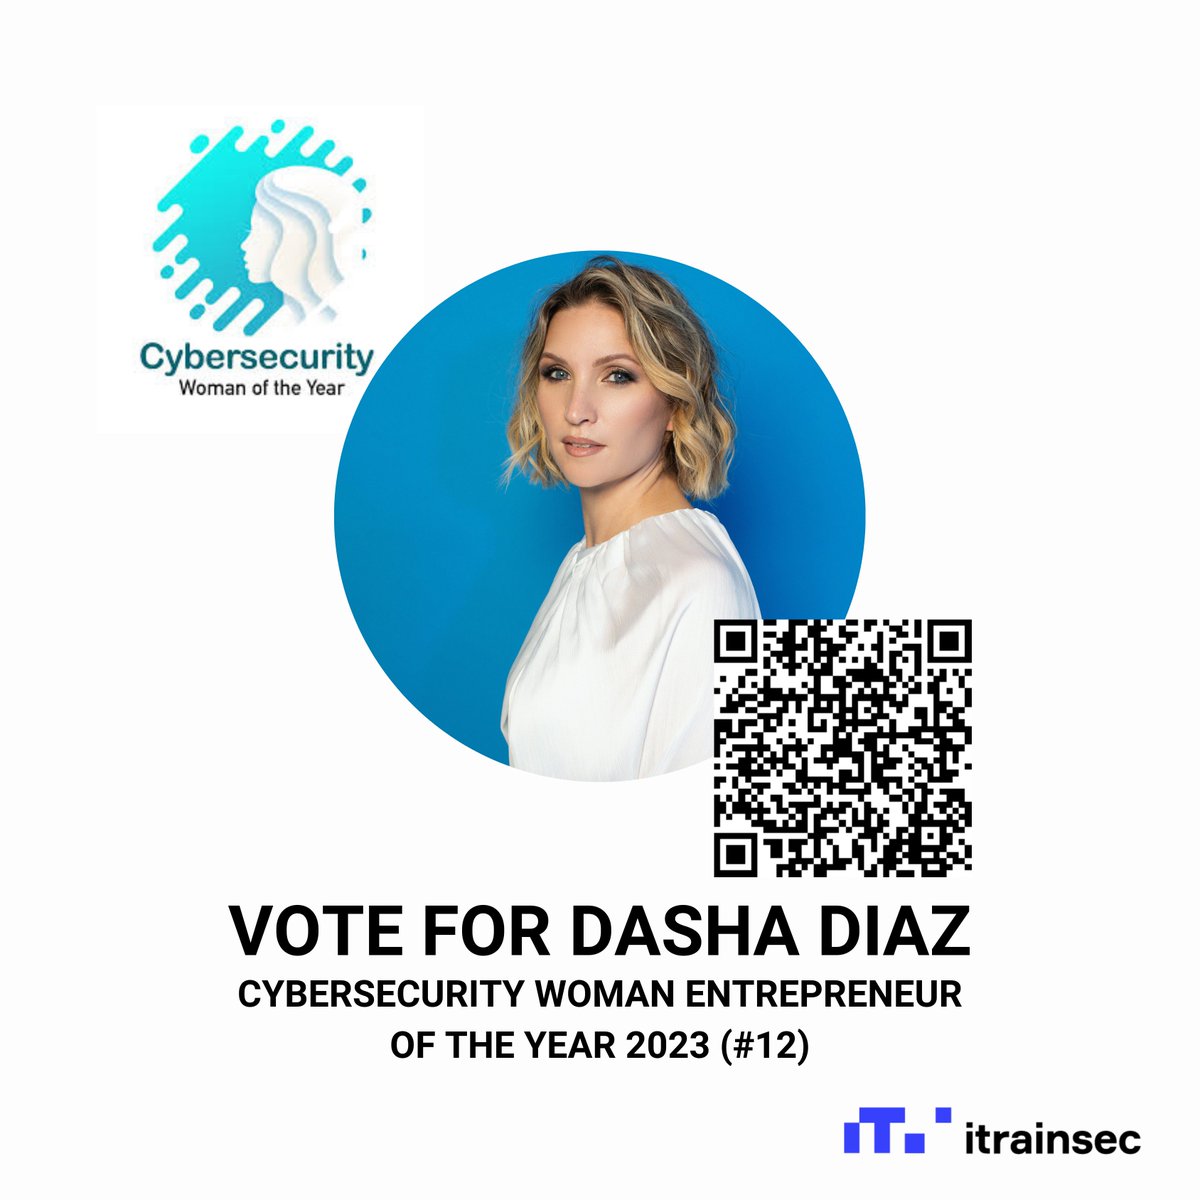 @itrainsec CEO, @dariaski, has been selected as a finalist for the 𝗖𝘆𝗯𝗲𝗿𝘀𝗲𝗰𝘂𝗿𝗶𝘁𝘆 𝗪𝗼𝗺𝗮𝗻 𝗘𝗻𝘁𝗿𝗲𝗽𝗿𝗲𝗻𝗲𝘂𝗿 𝗼𝗳 𝘁𝗵𝗲 𝗬𝗲𝗮𝗿 𝟮𝟬𝟮𝟯 by @UnitedCybersec1! Cast your vote➡️bit.ly/42WbOXC.

#cybersecuritywomanoftheyear #CSWY2023 #womenincyber